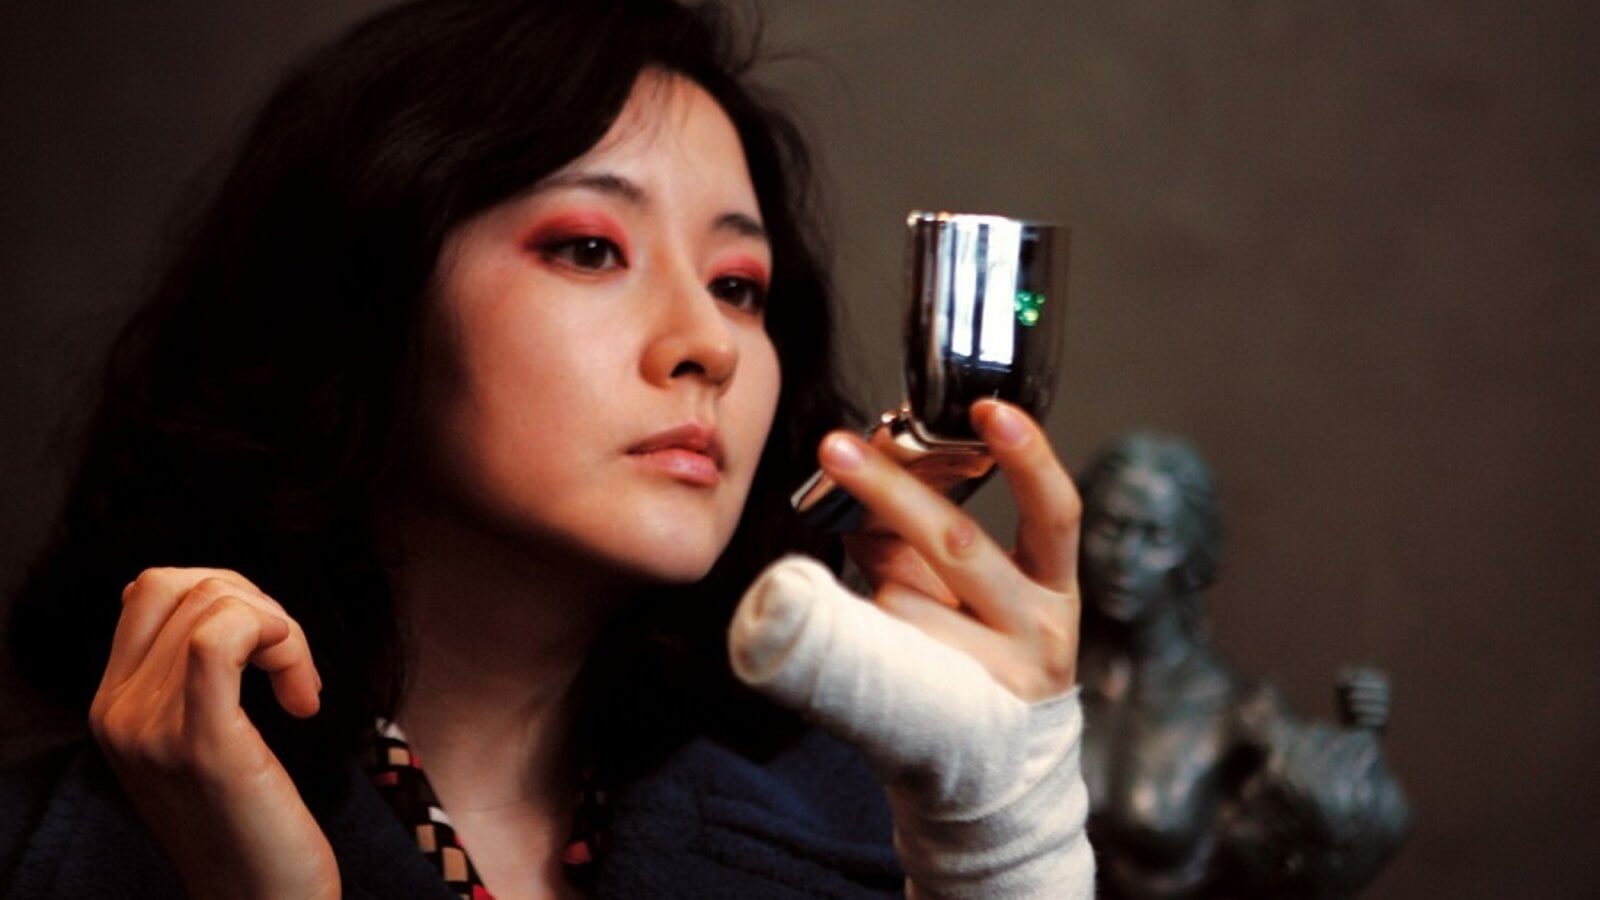 Sympathy For Lady Vengeance